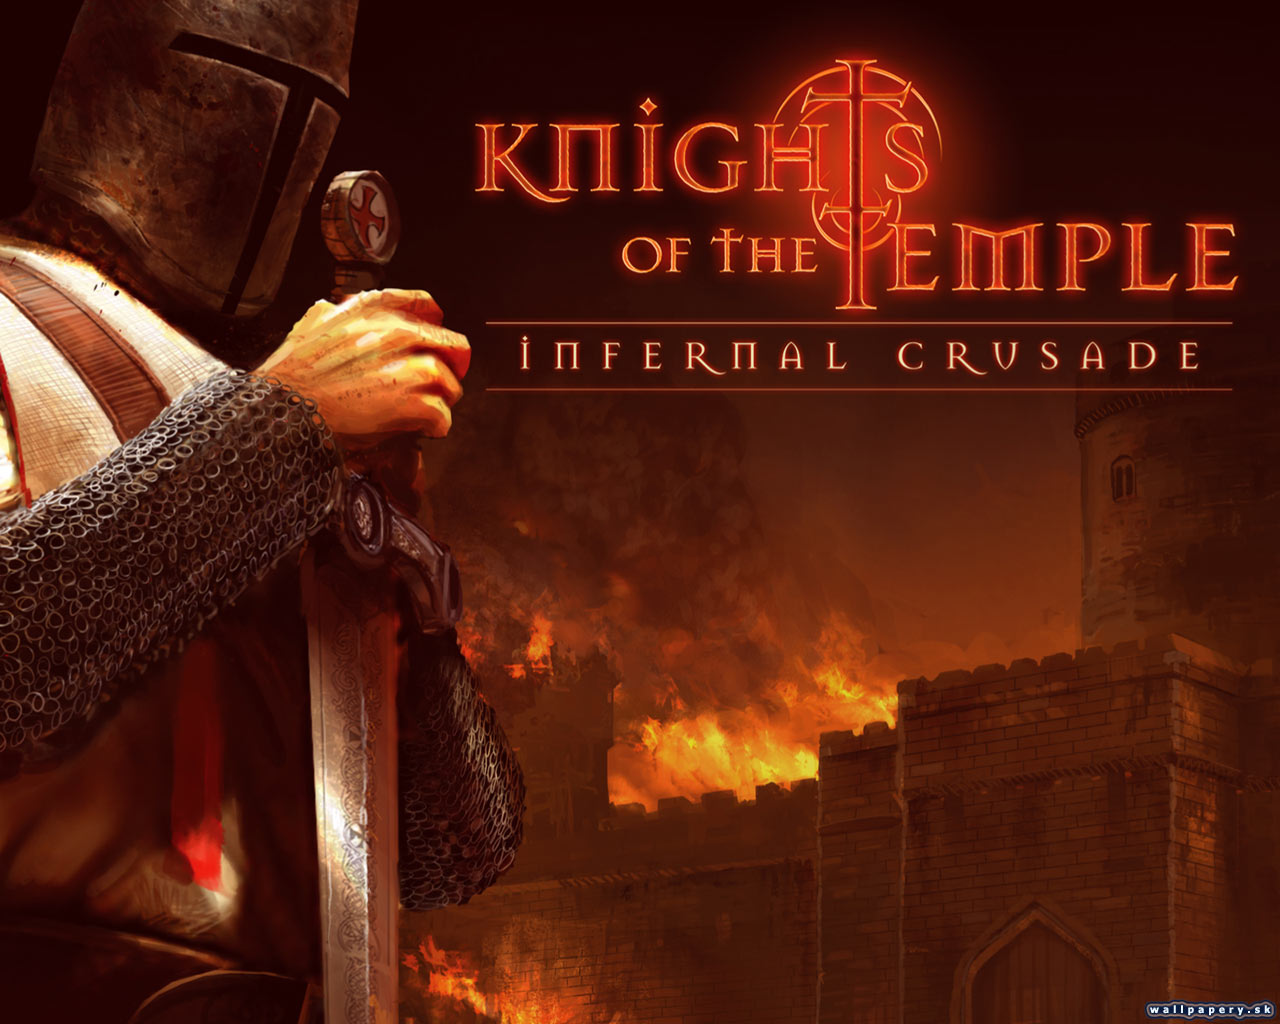 Knights of the Temple: Infernal Crusade